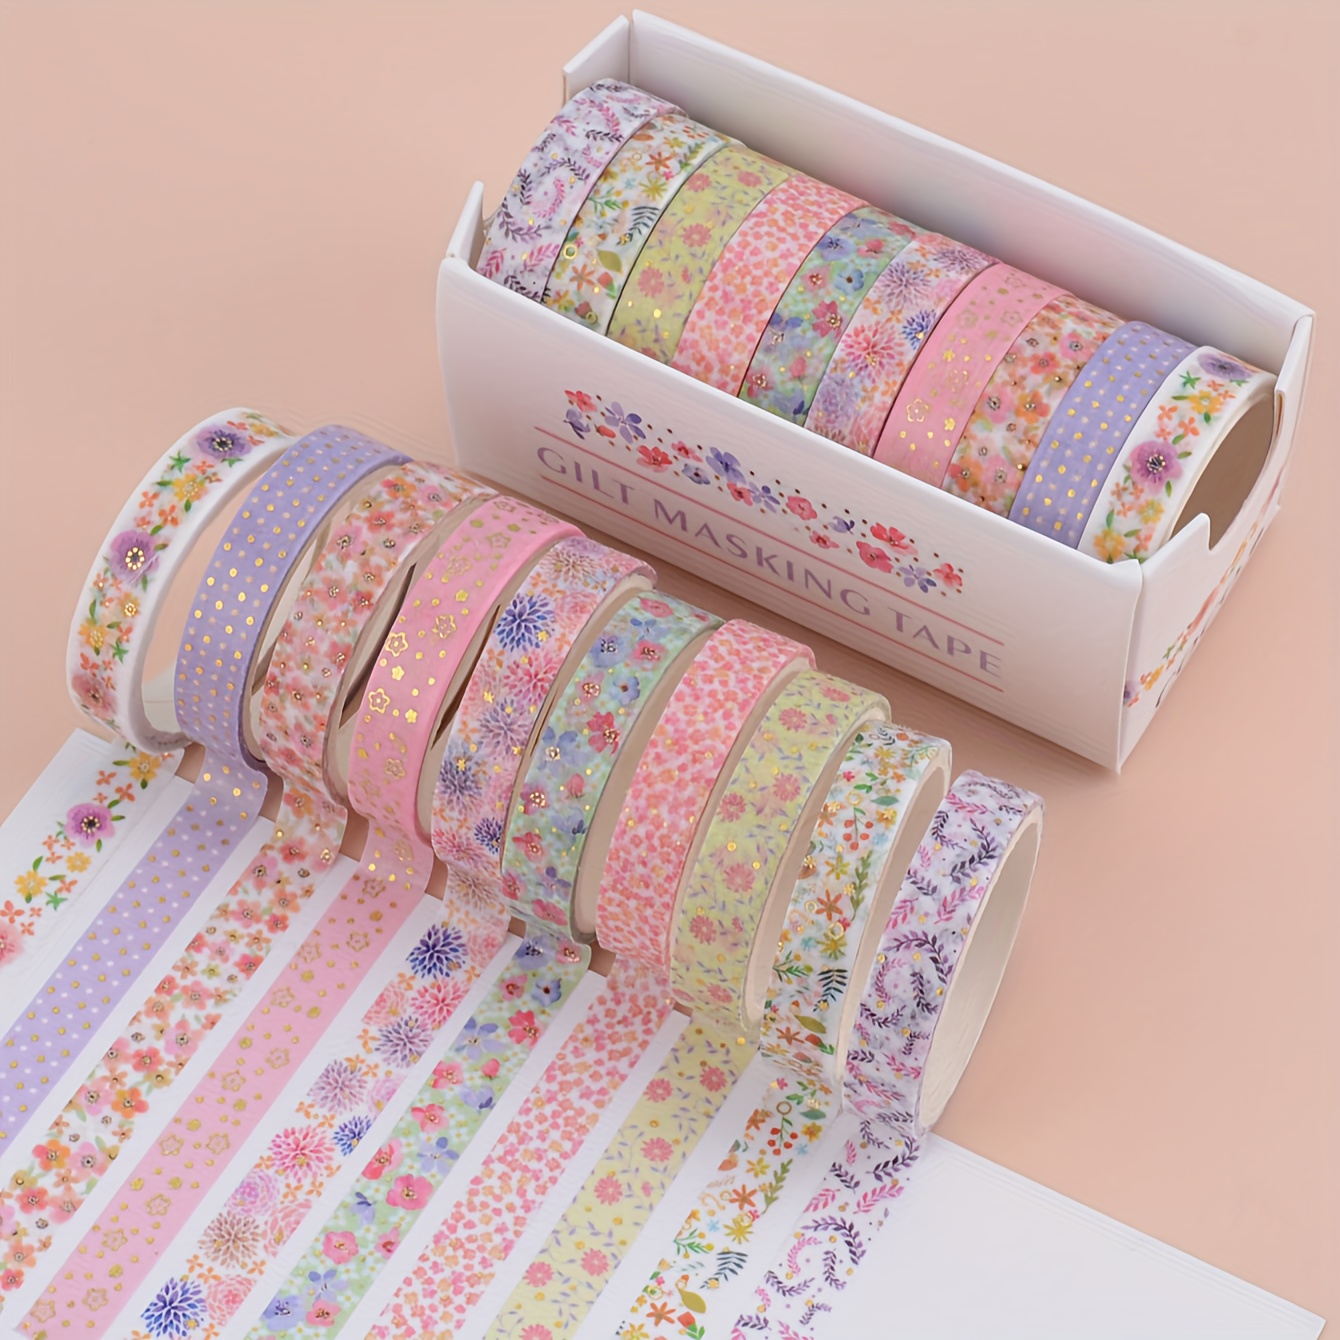 10 Rolls/Box Star Hot Stamped Washi Tape, Cartoon Delicate Diy Stationery  Decoration Colorful Scrapbooking Tape For Students